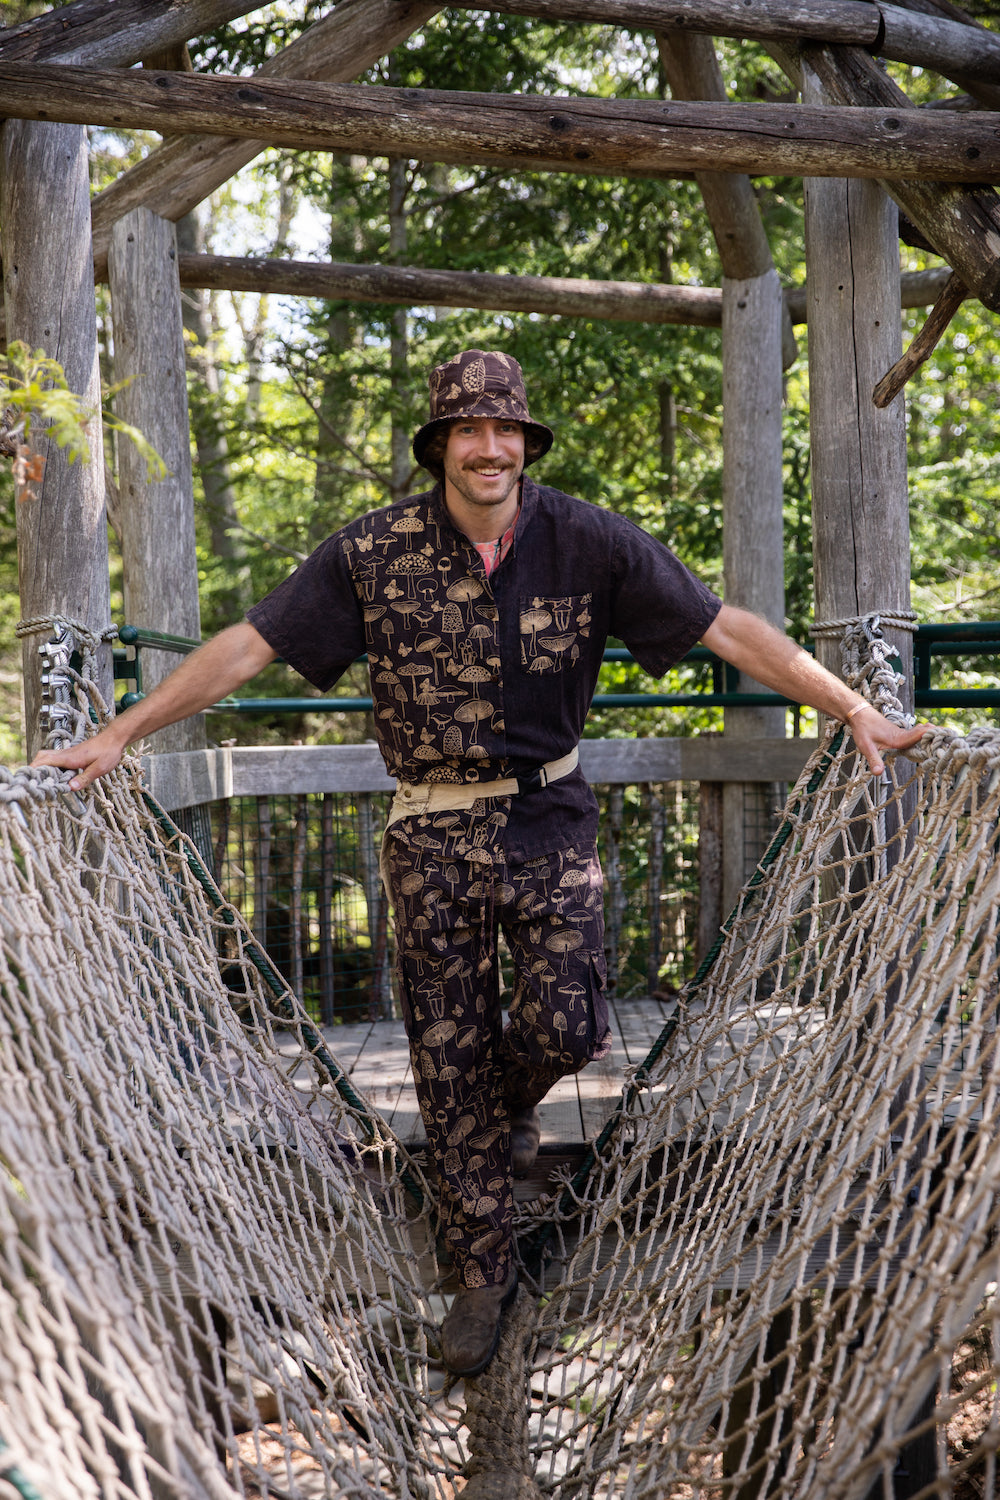 A handsome man with a mustache crossing a rope bridge in a brown matching mushroom outfit